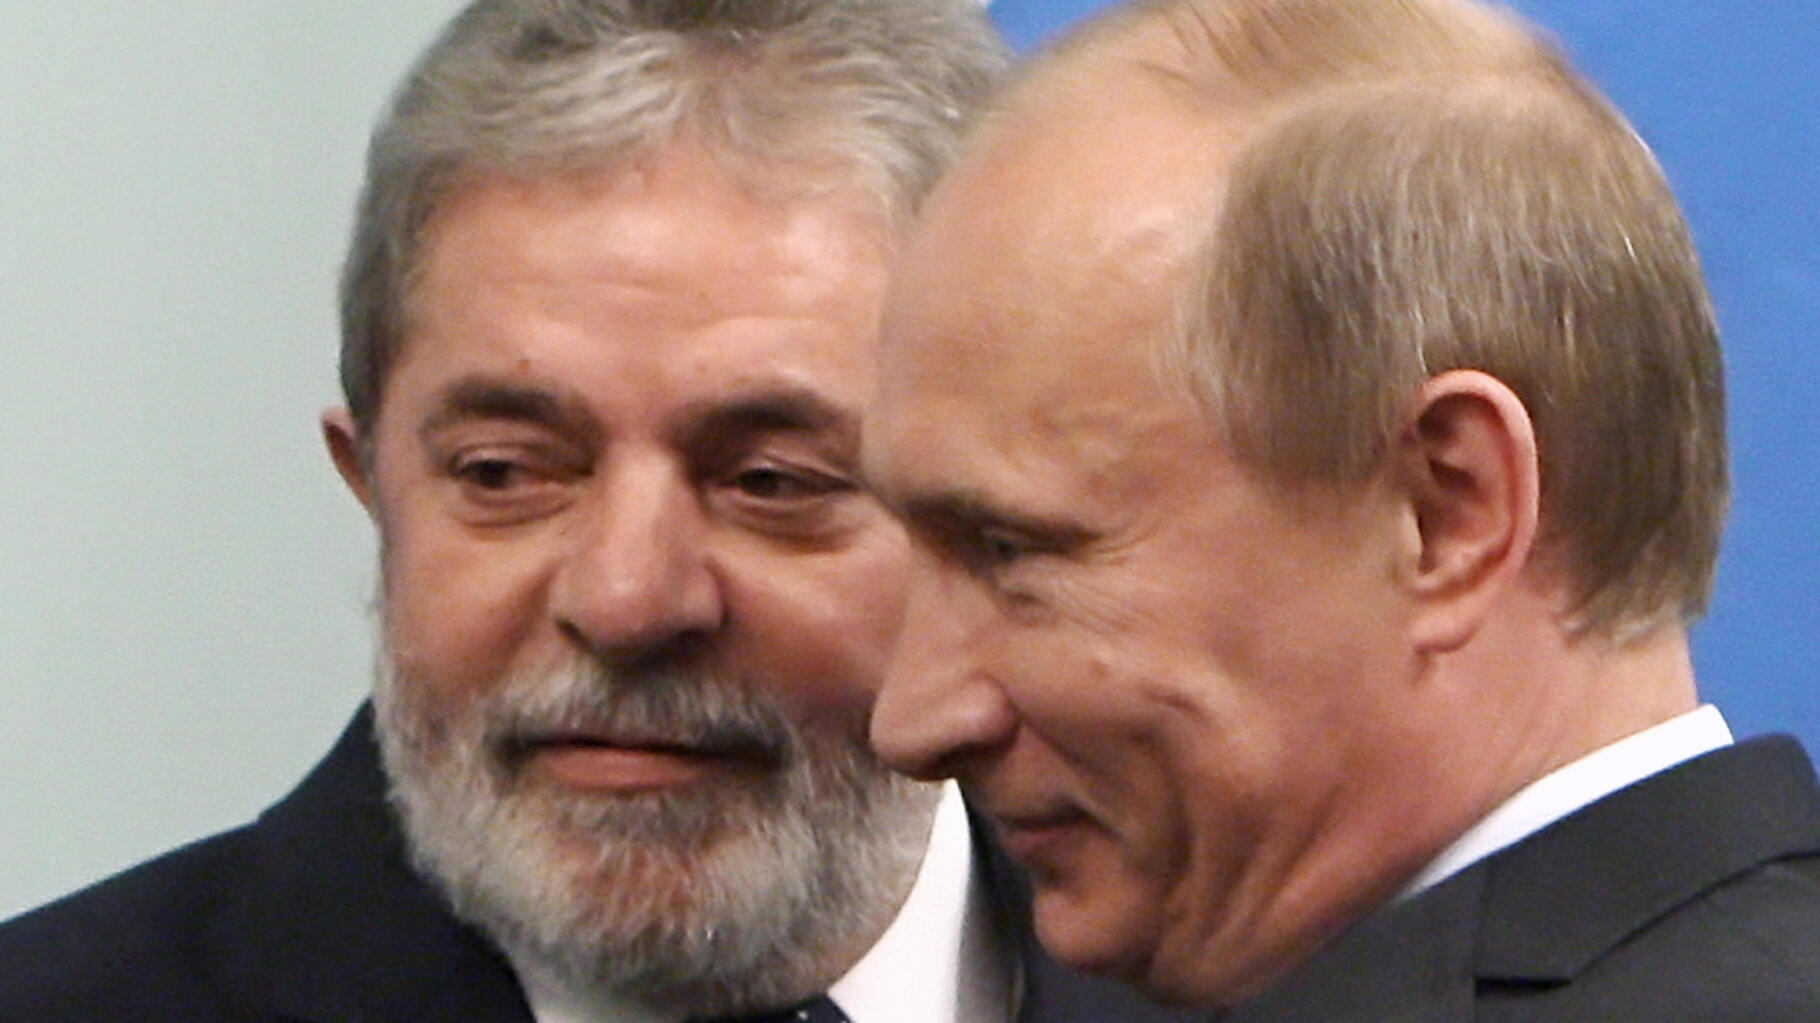 Putin arrested in the next G20 match in Brazil?  “No reason,” Lula assures, except that …